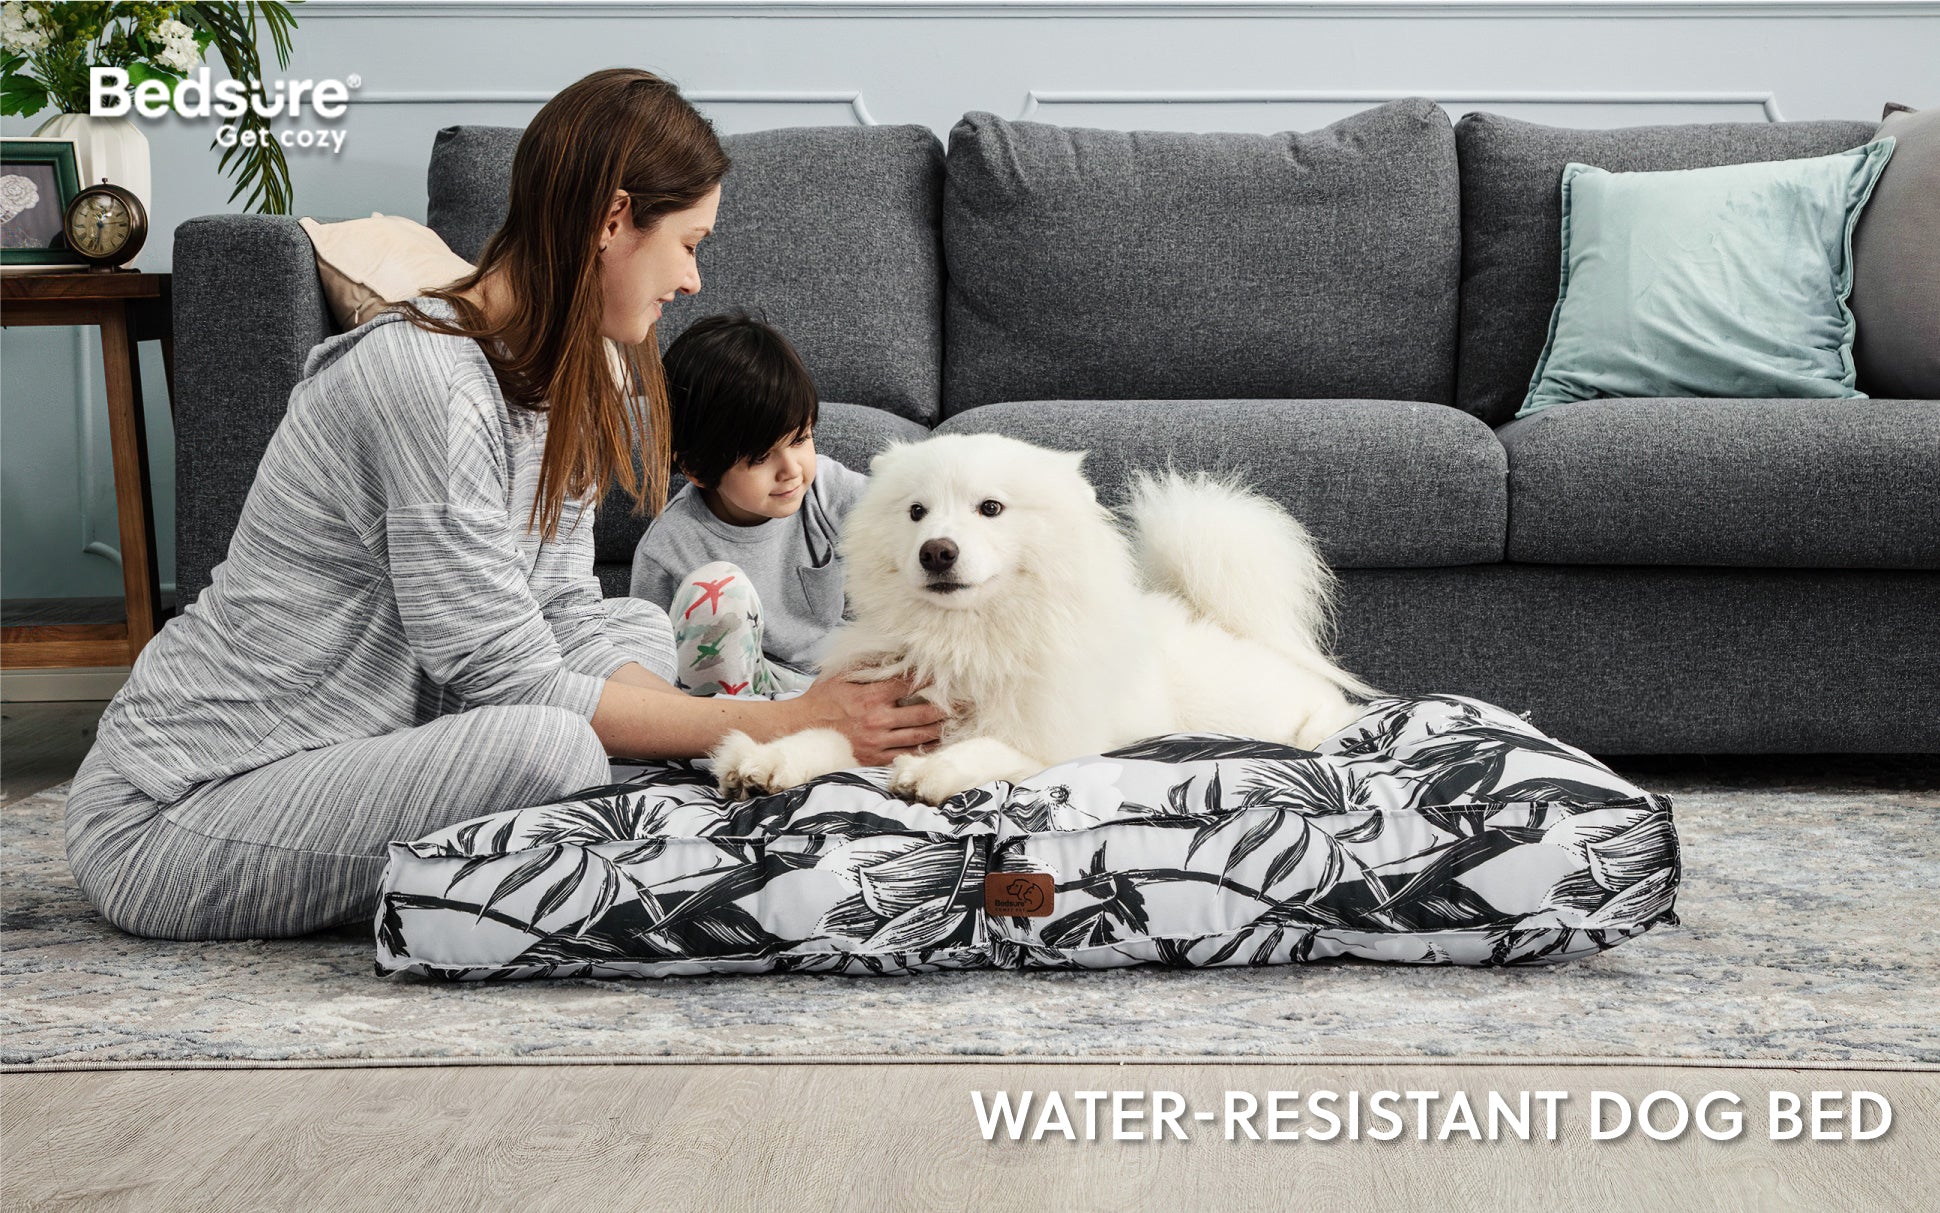 Mum and son sit with their pet dog in Bedsure water-resistant dog bed.